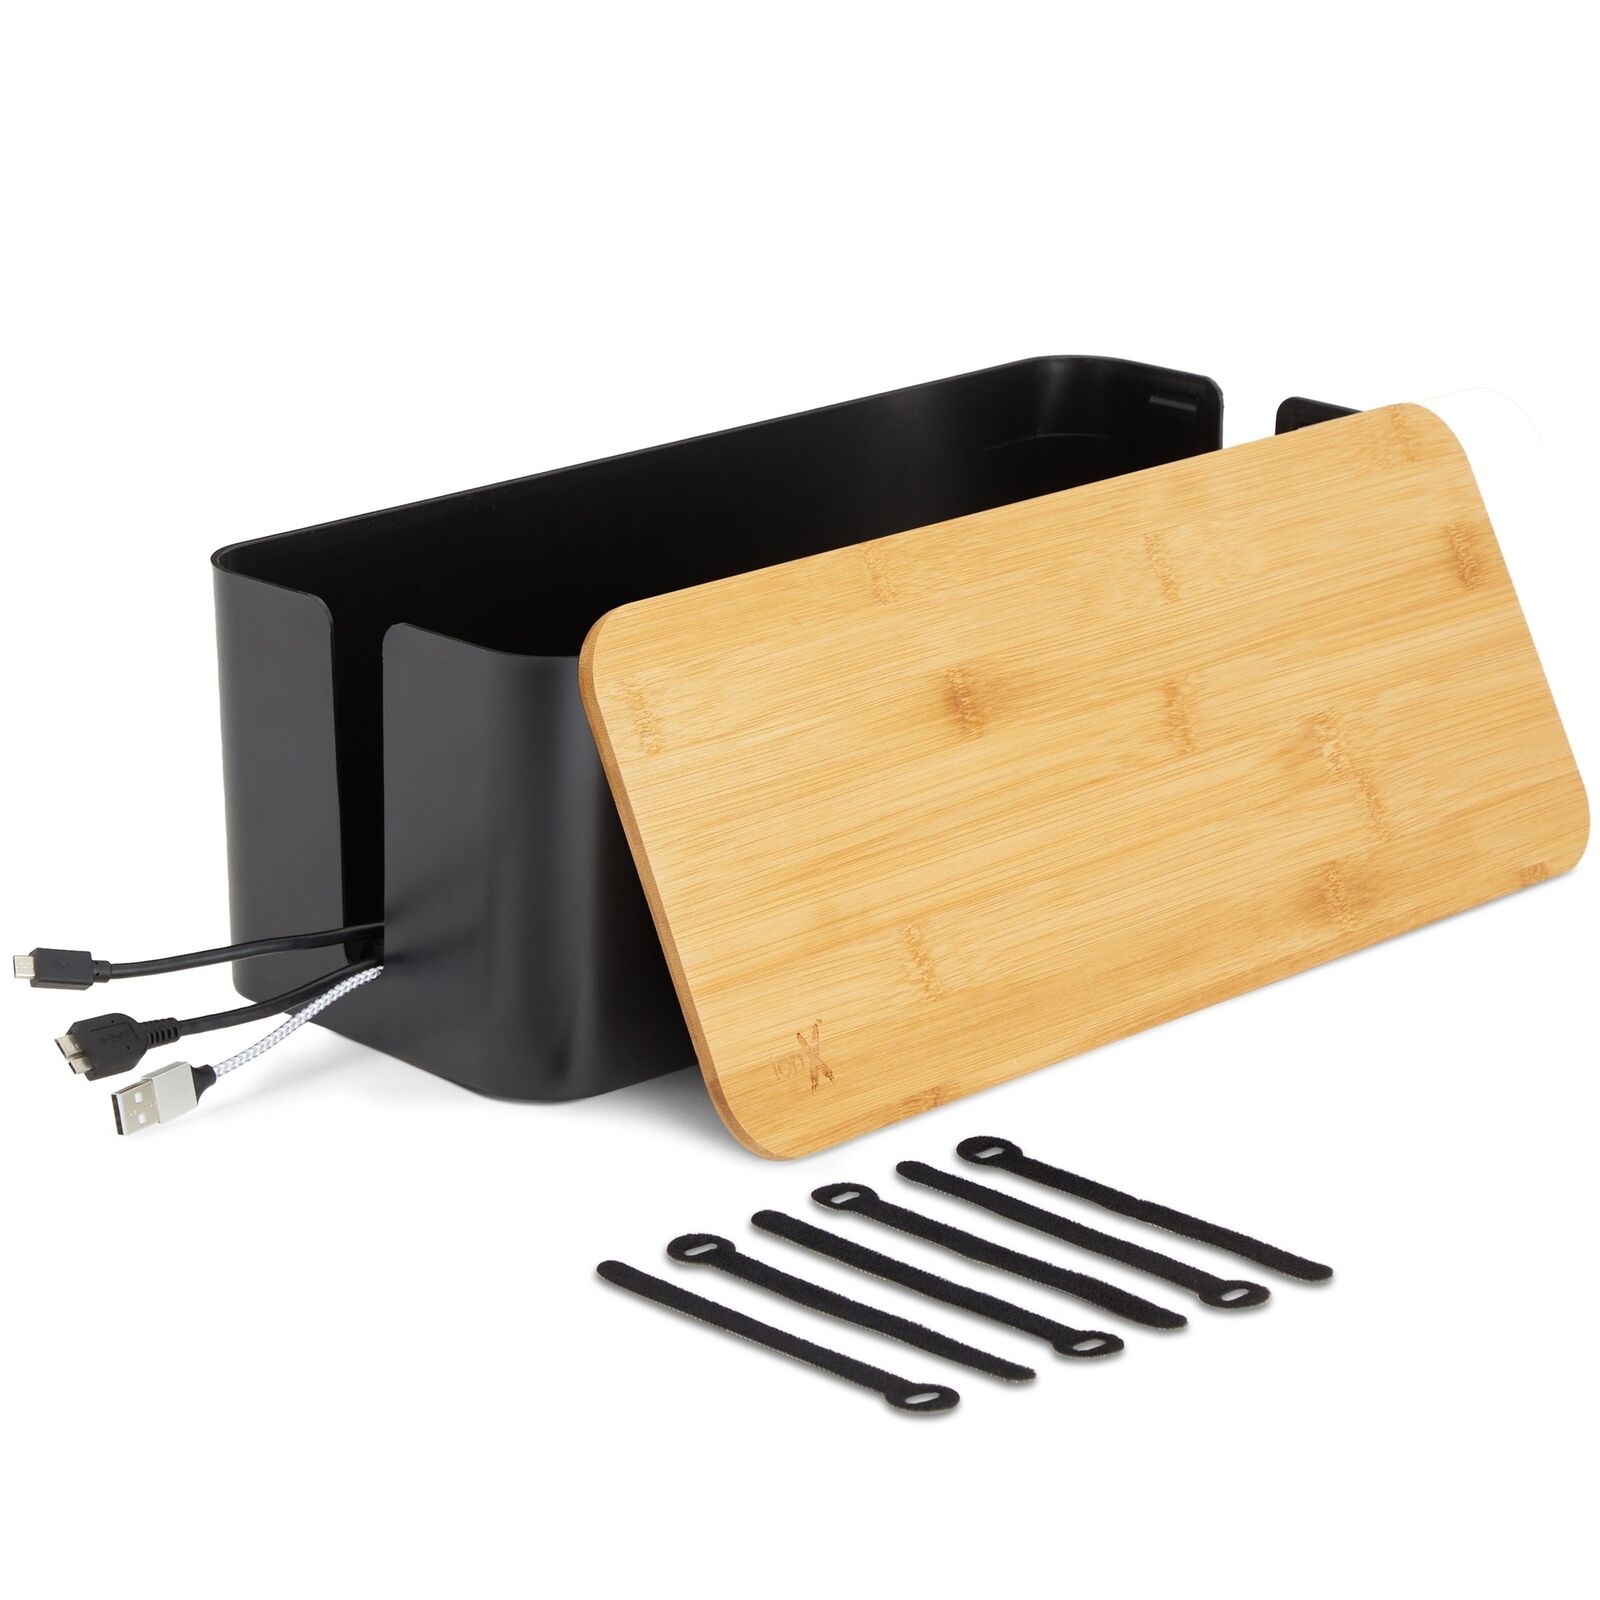 Box for Cable Management, 1 Large ABS Cord Organizer Box with Bamboo Lid, Black